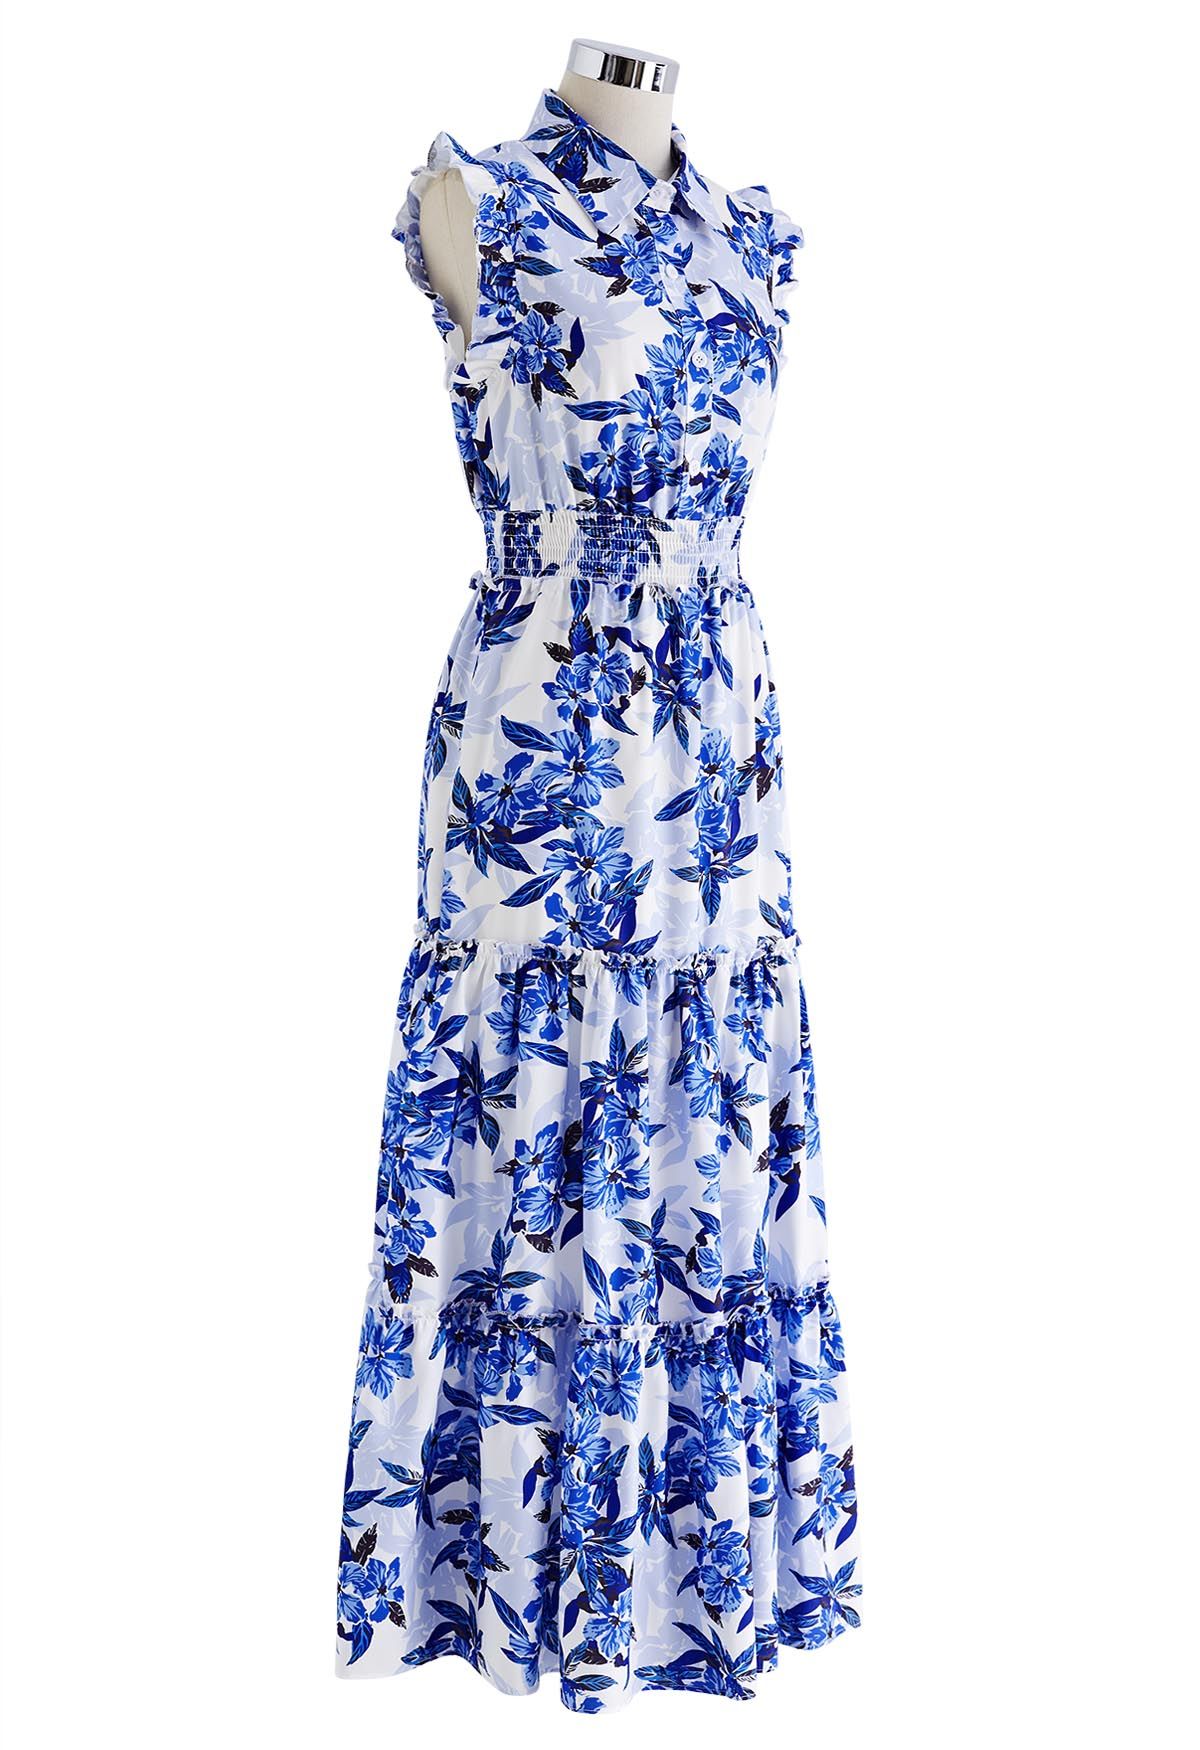 Blue Floral Collared Buttoned Sleeveless Dress - Retro, Indie and ...